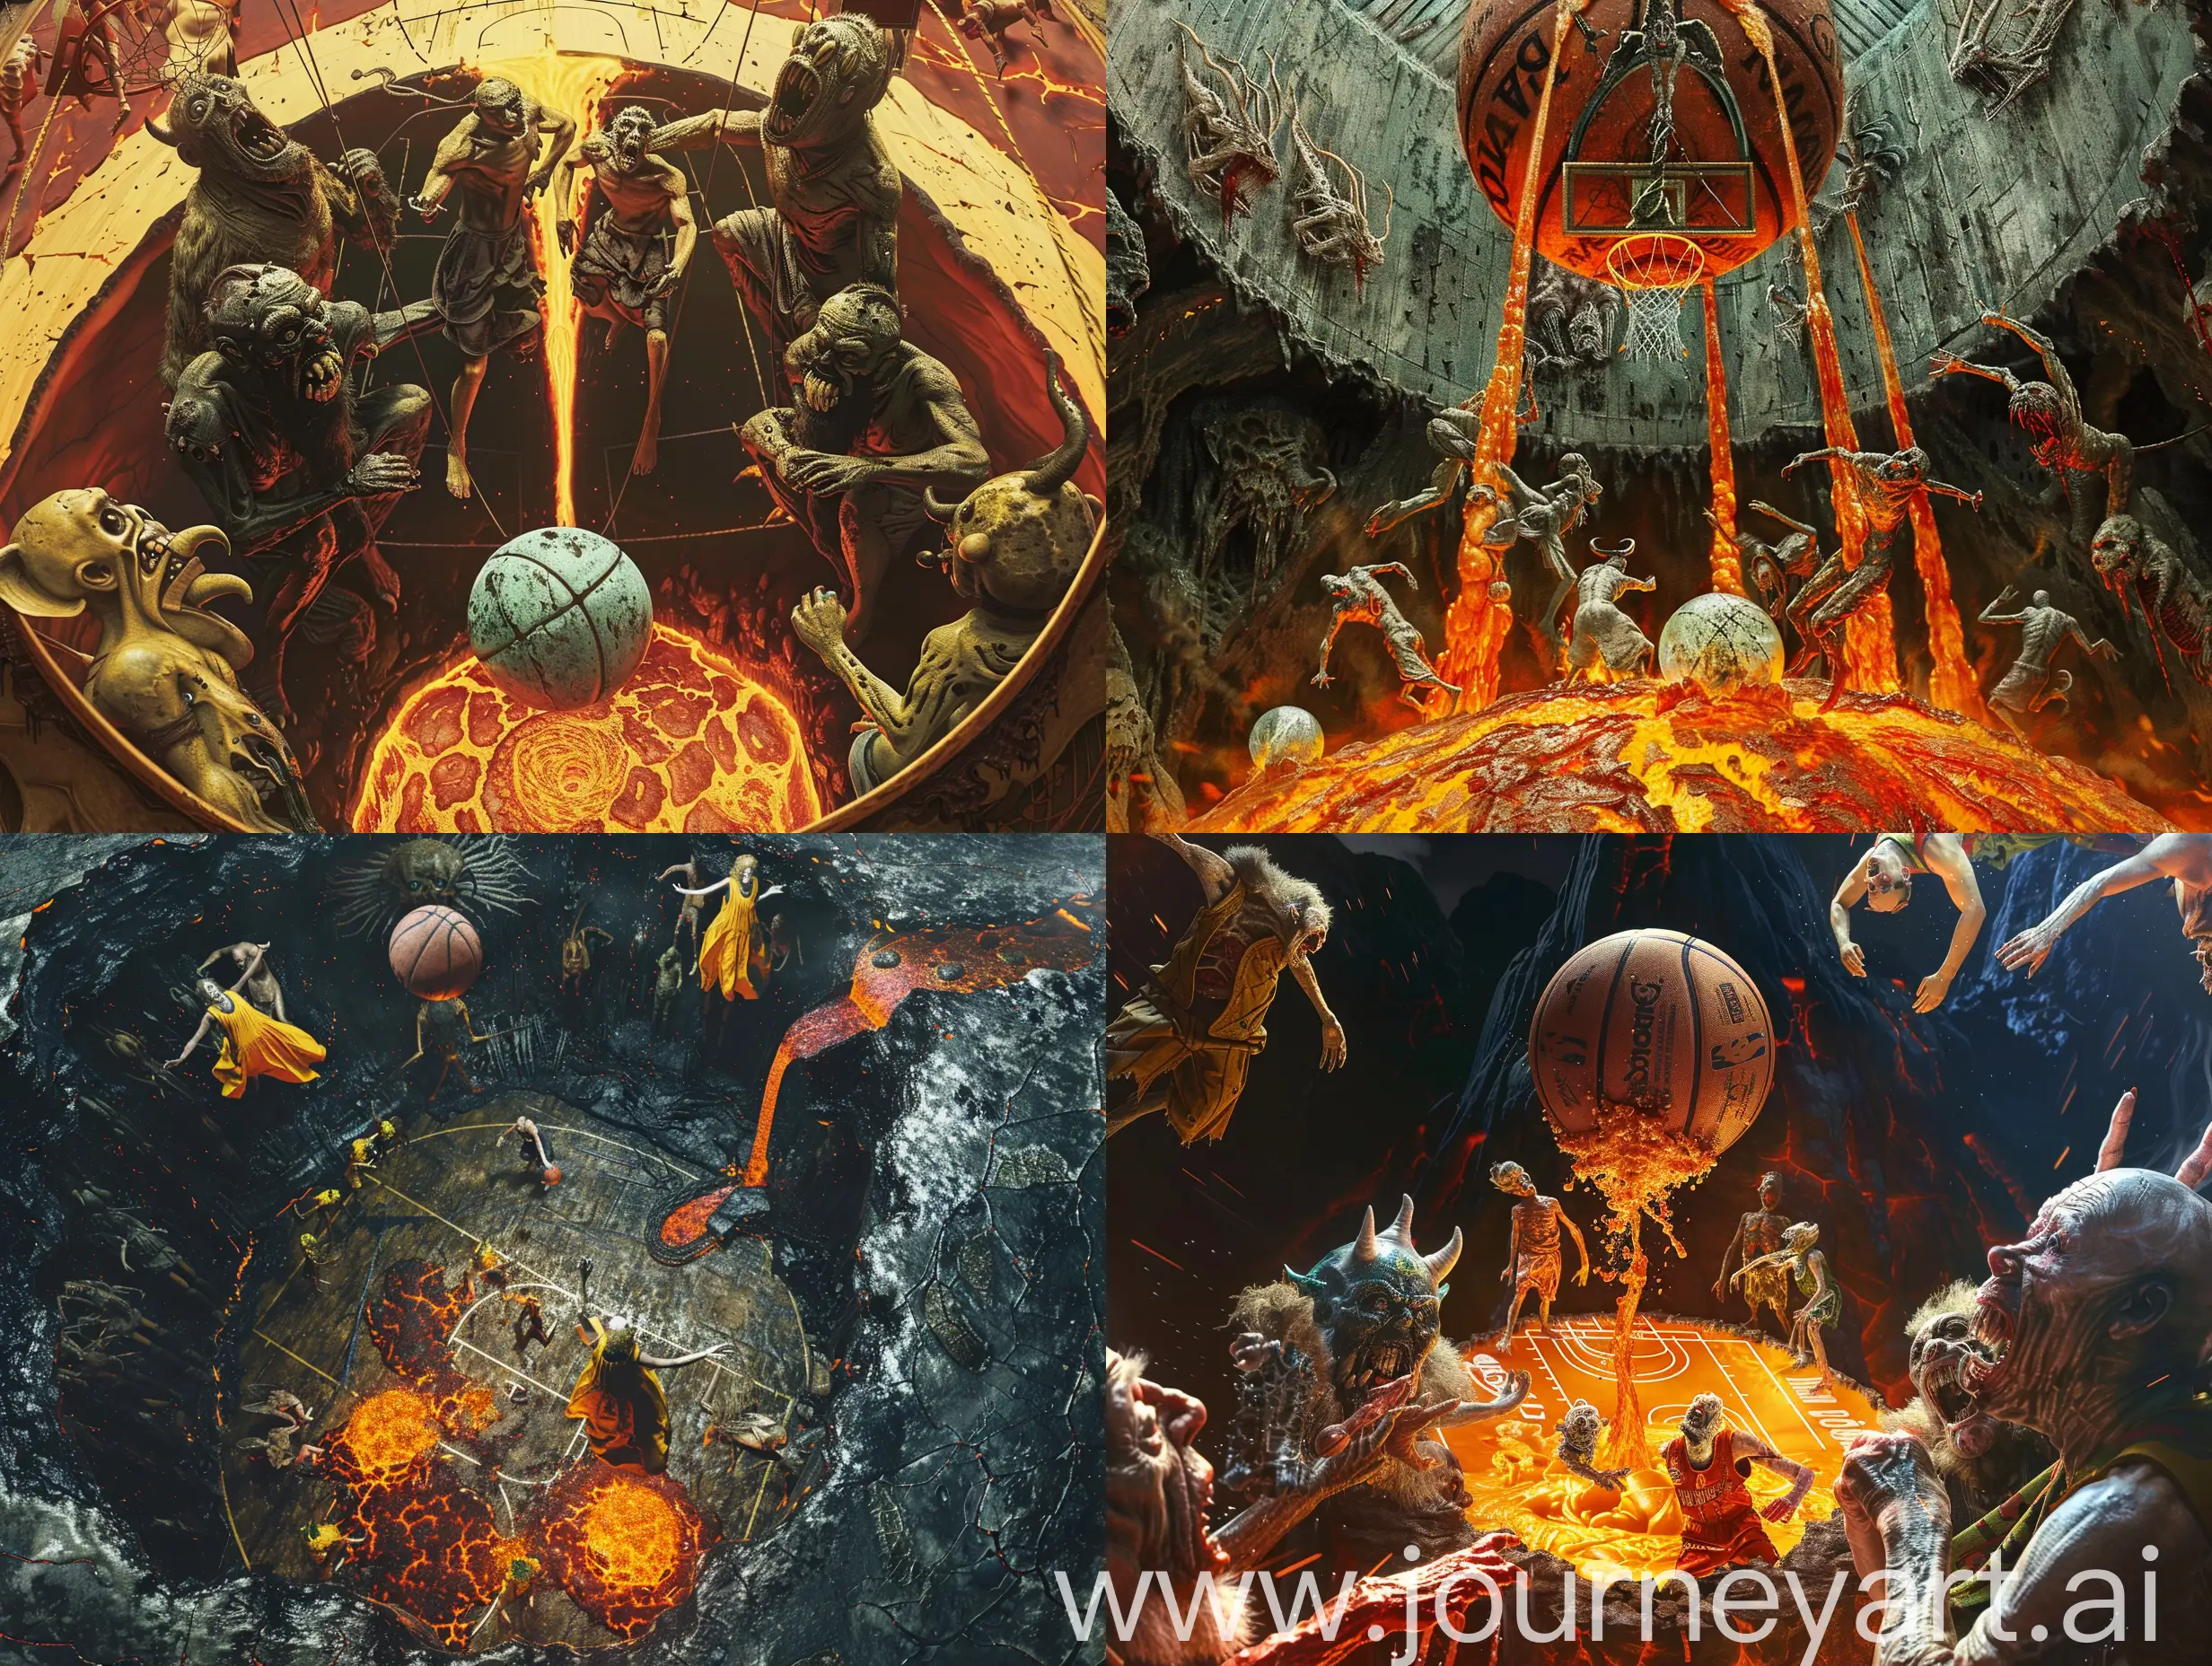 A basketball game with the players who are Hieronymus Bosch's monsters, the playing field is located under the volcano, the lava comes down from the volcano and surrounds the playing field, the ball is a frozen globe. bottom view, hyperrealism, gothic style